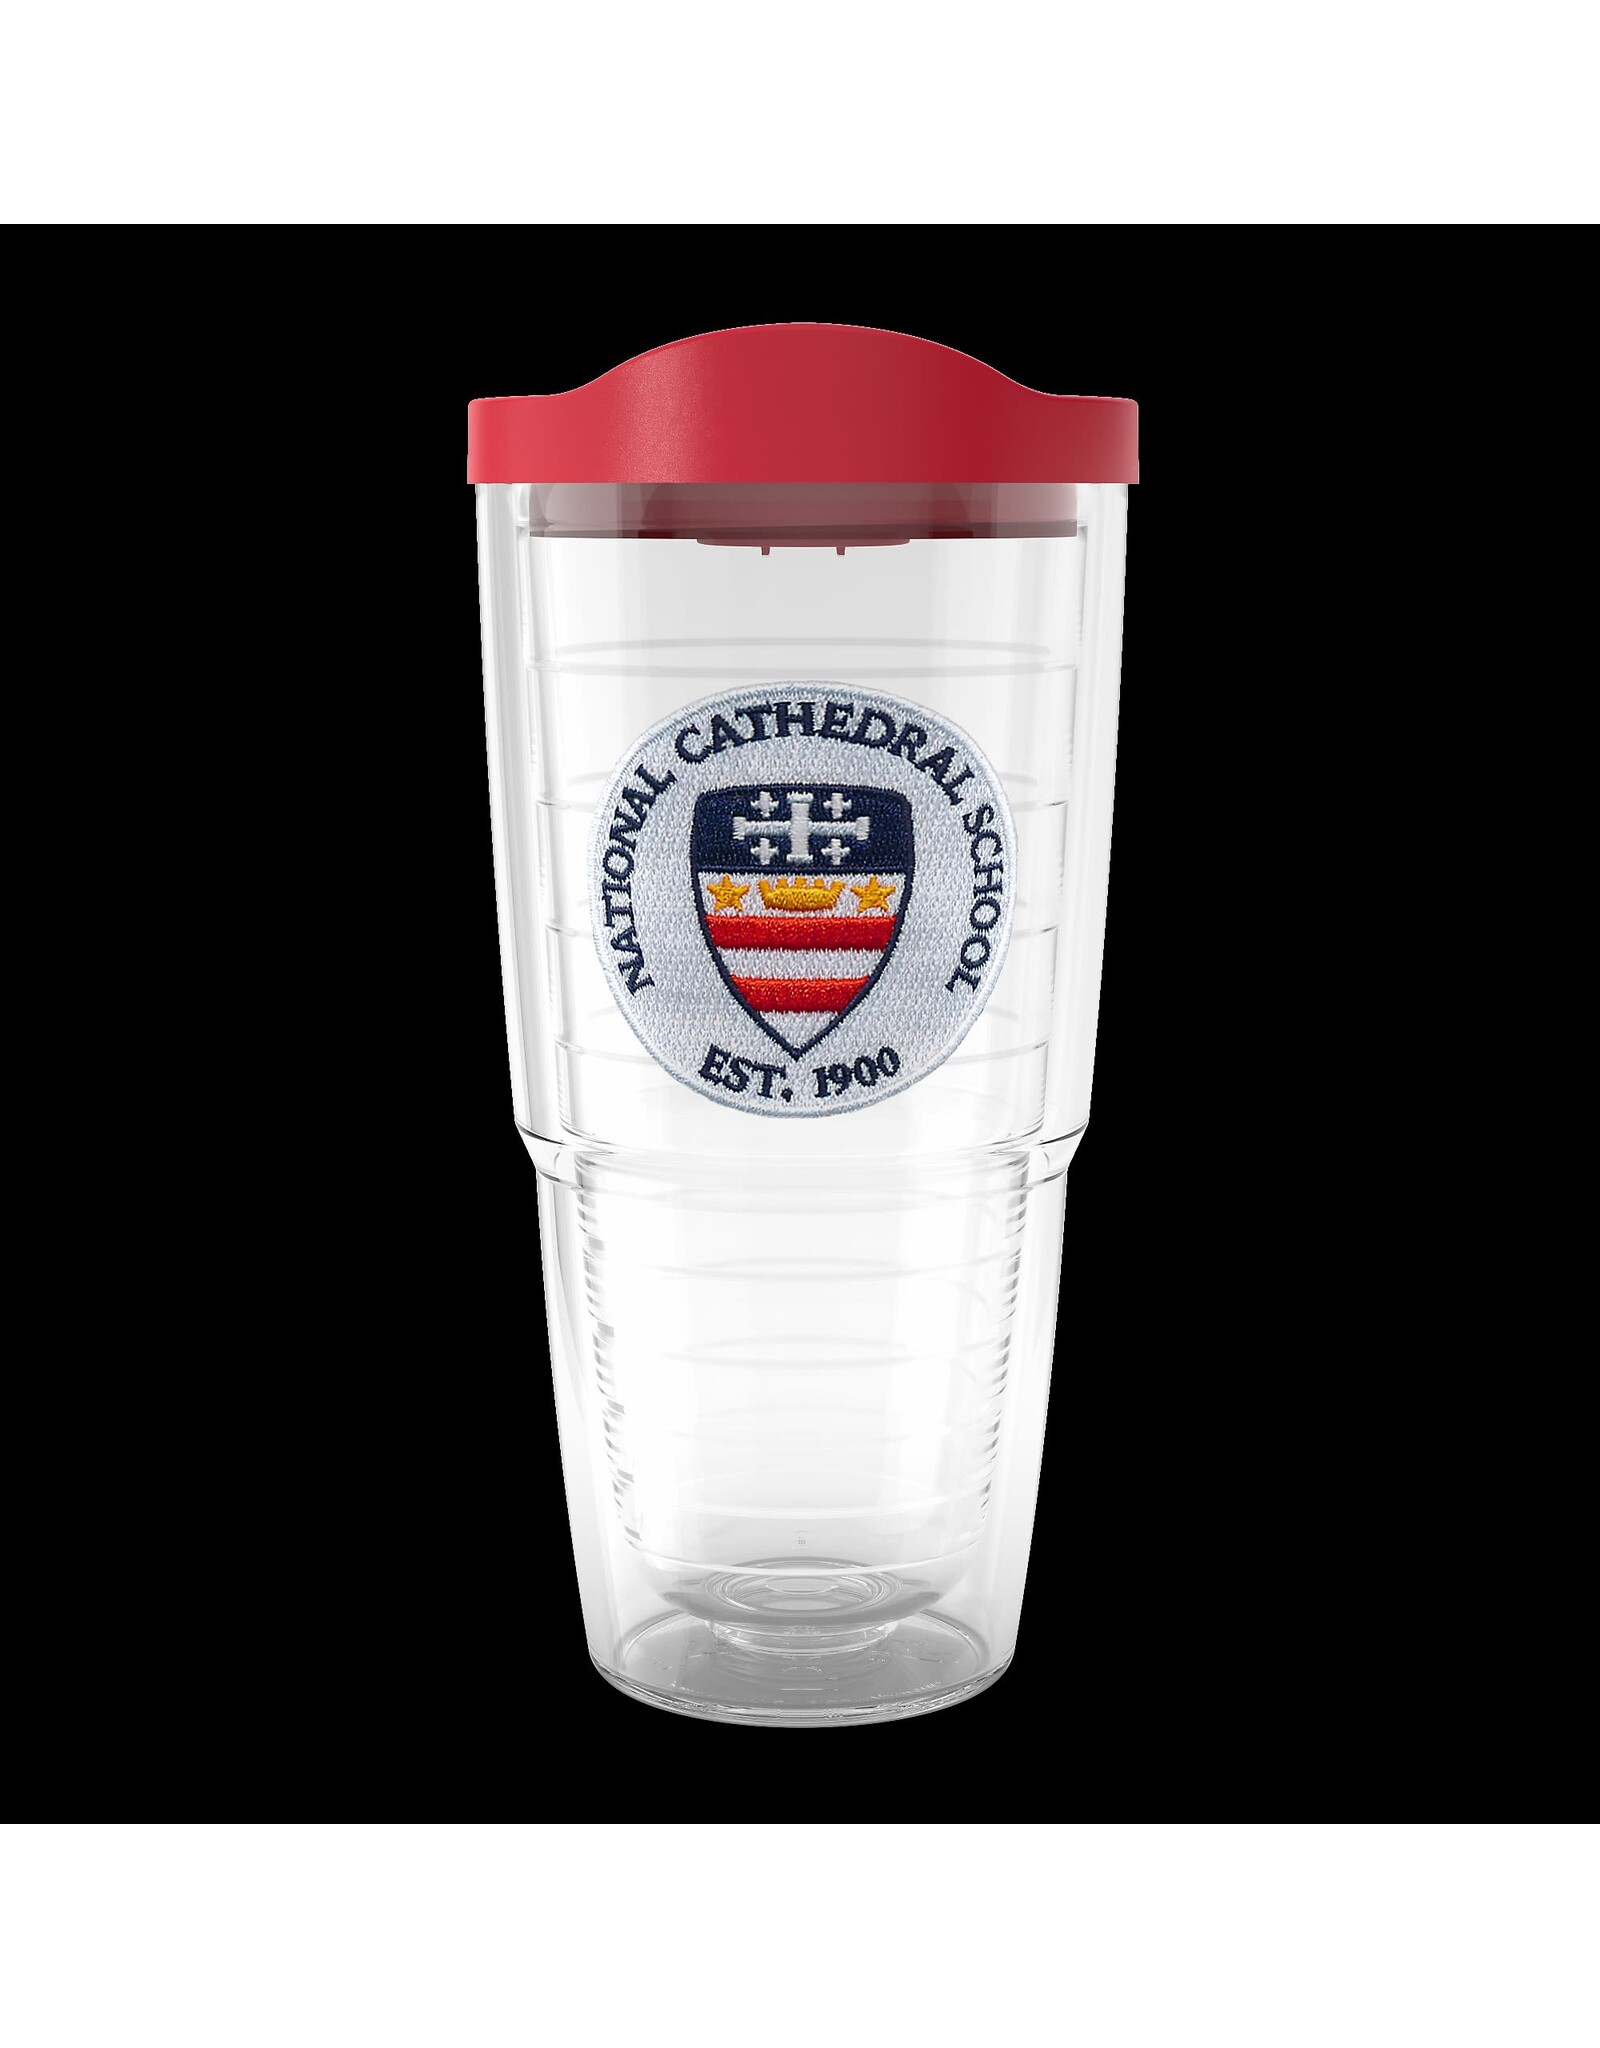 Tervis Tumbler Red Lid 24oz